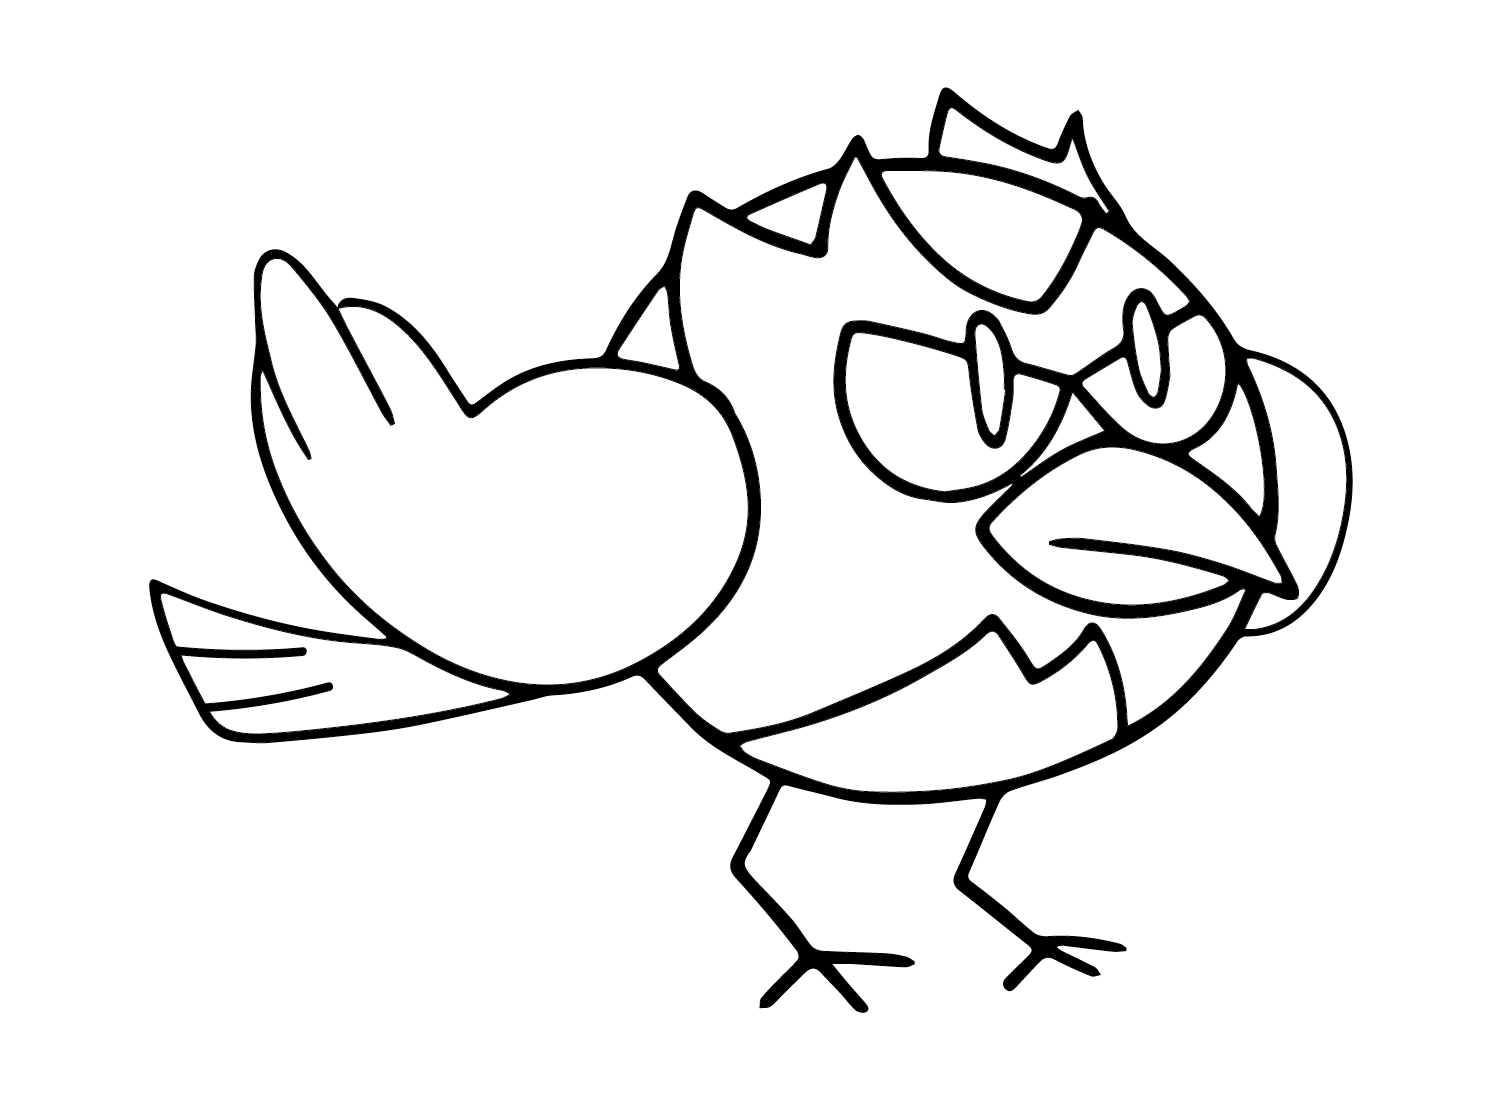 The Rookidee Coloring Page